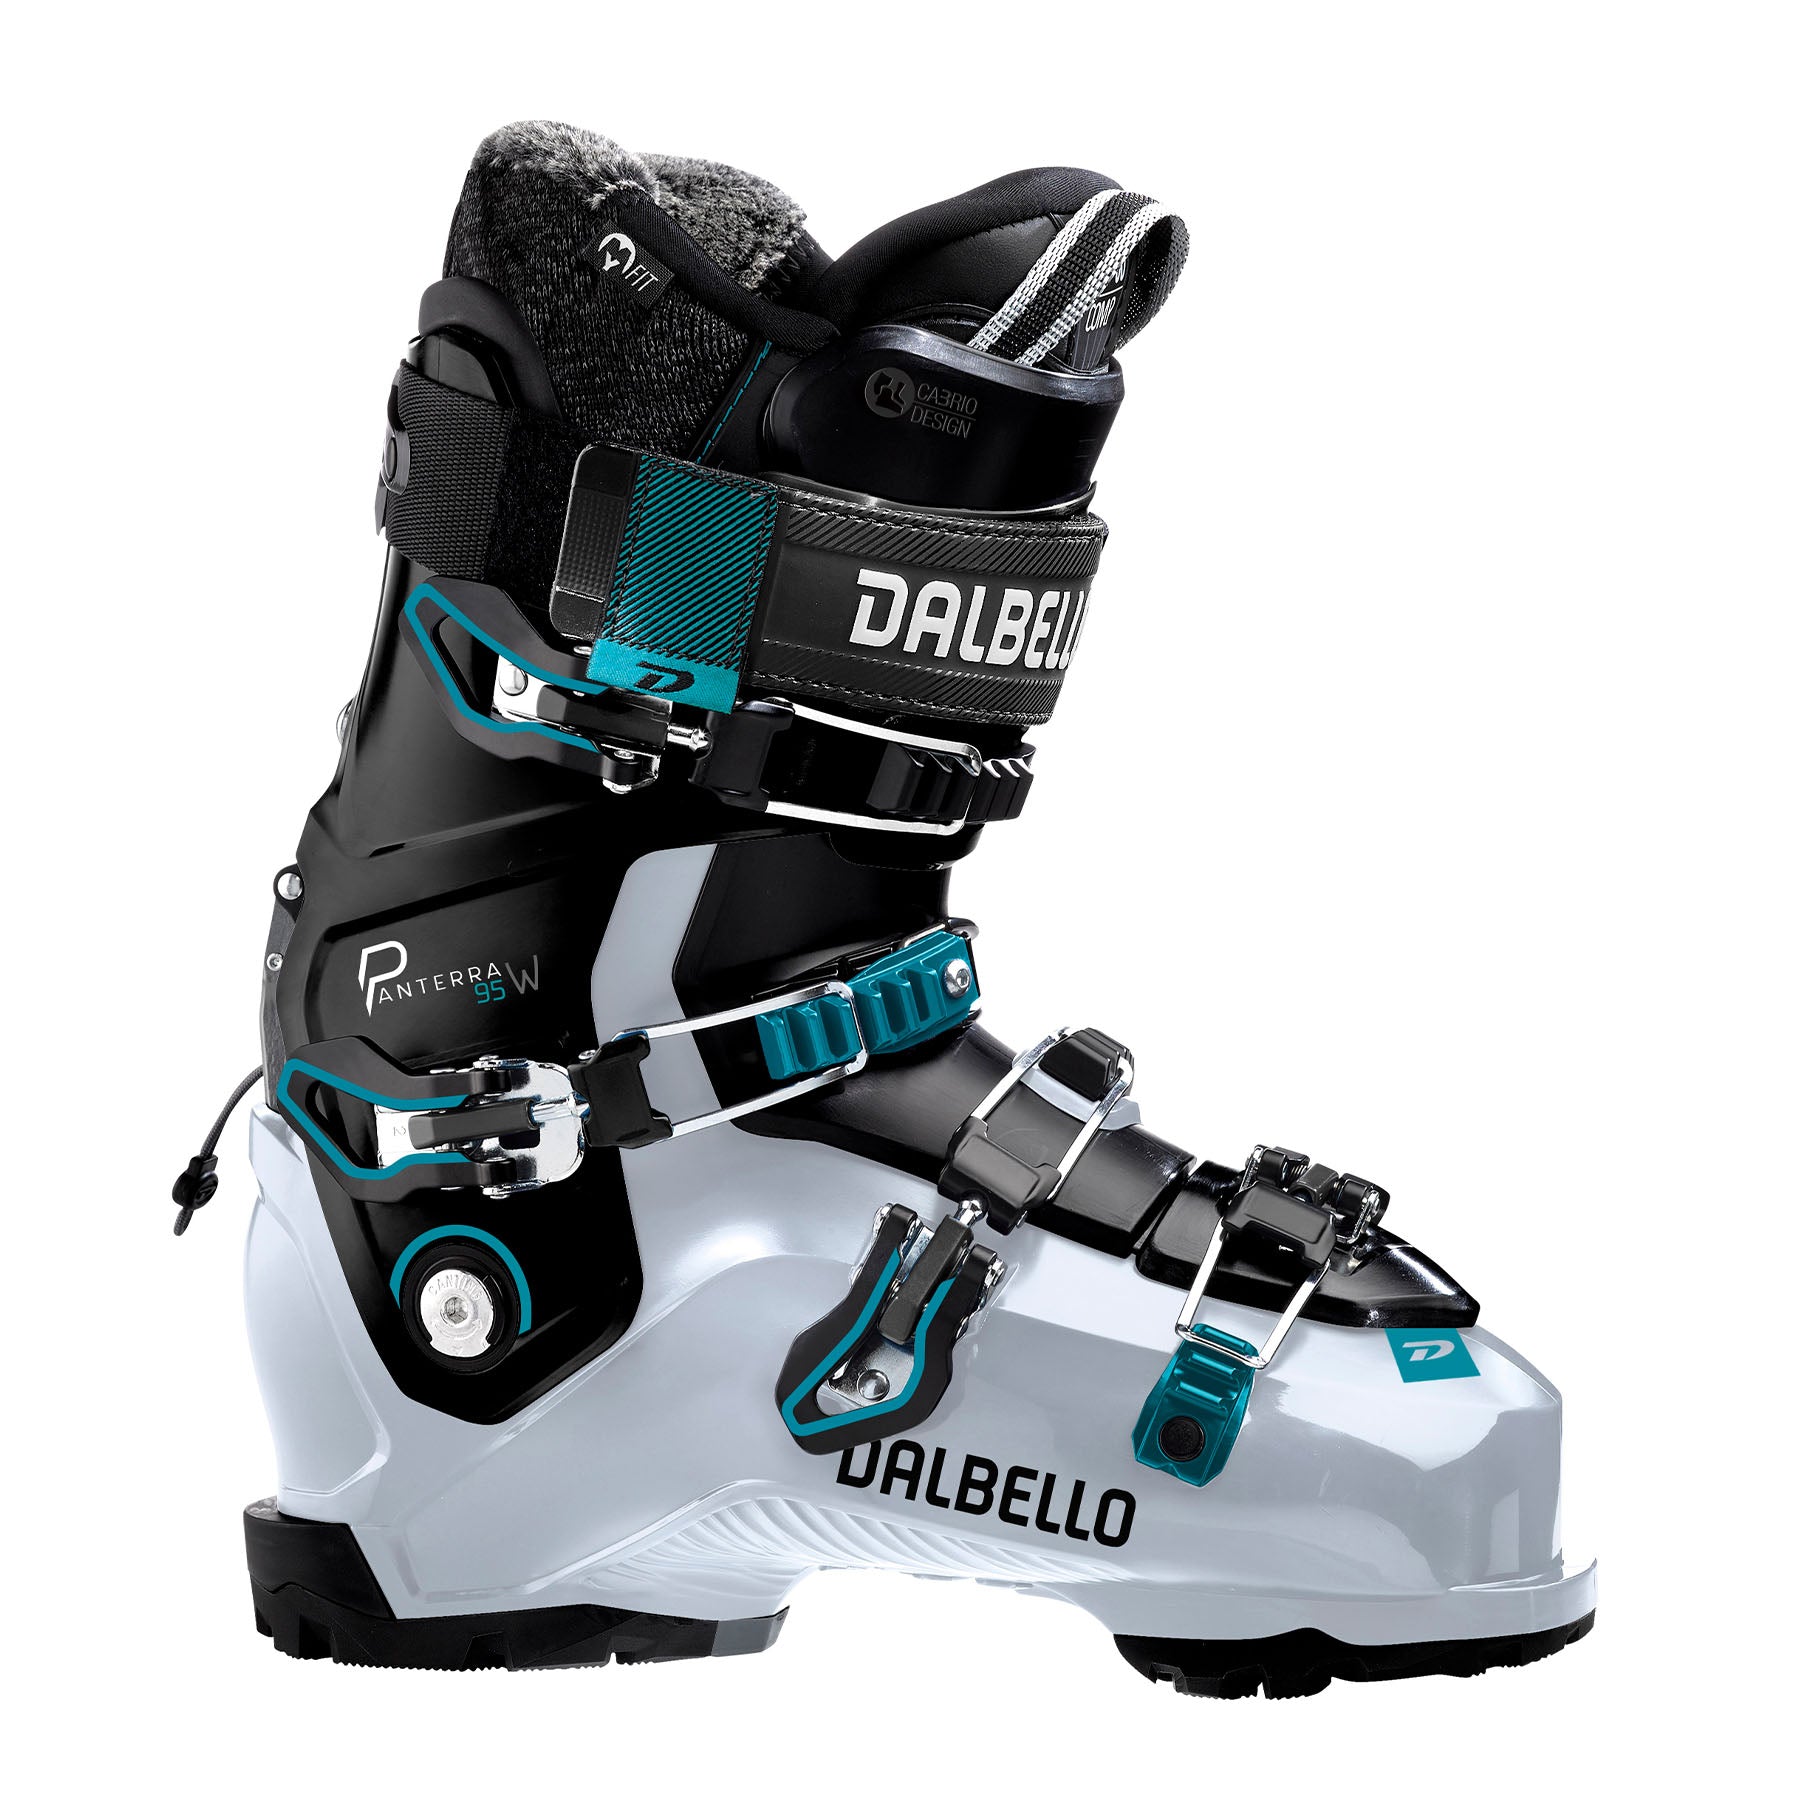 Hero image featuring a side angle shot of the Women's Panterra 95 ski boot in white and black and turquoise trim.